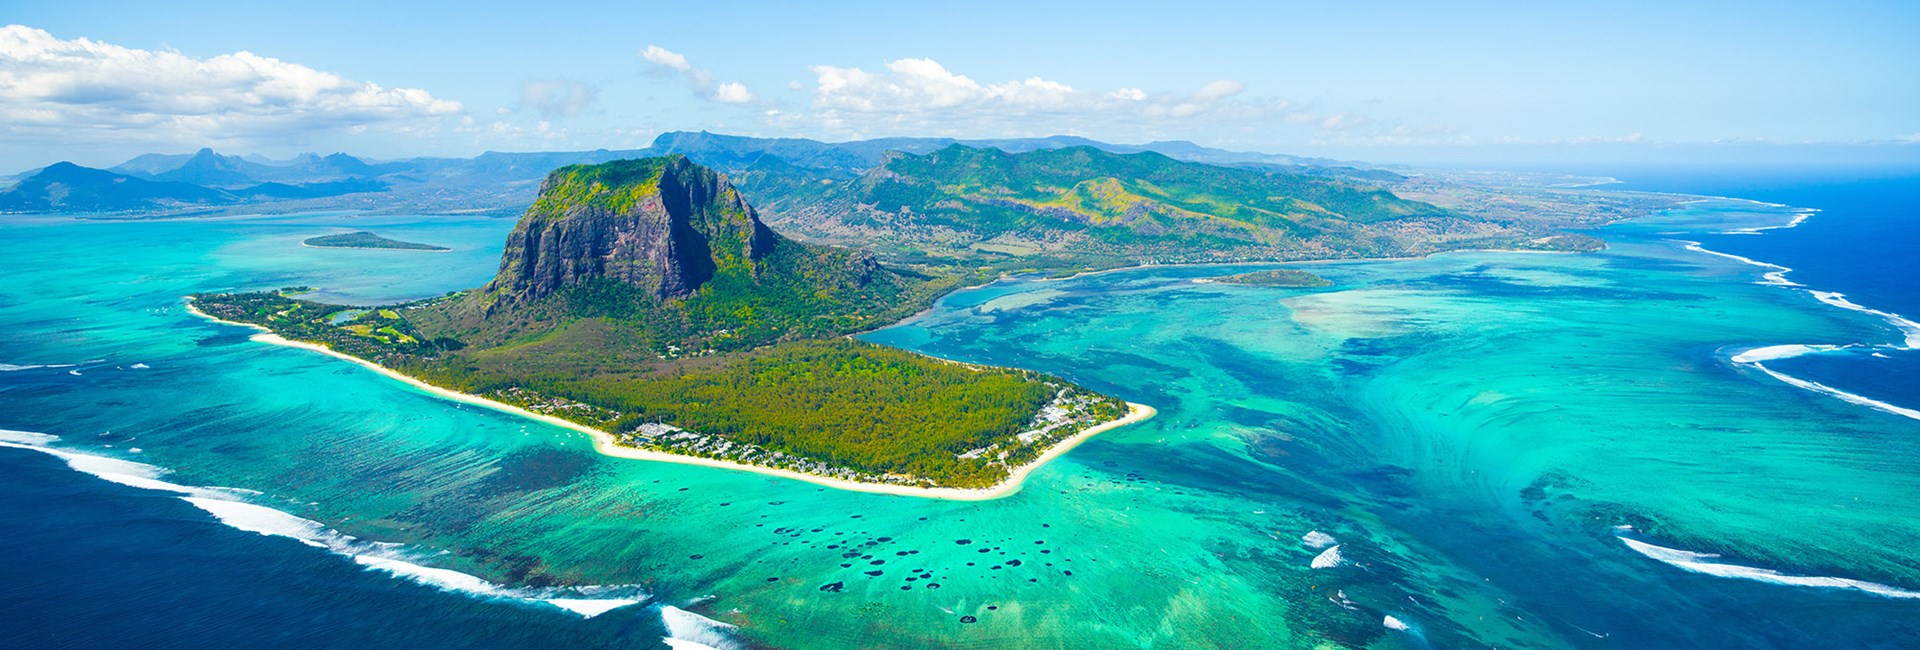 Aerial view of mountainous tropical island surrounded by shallow reefs and clear turquoise sea